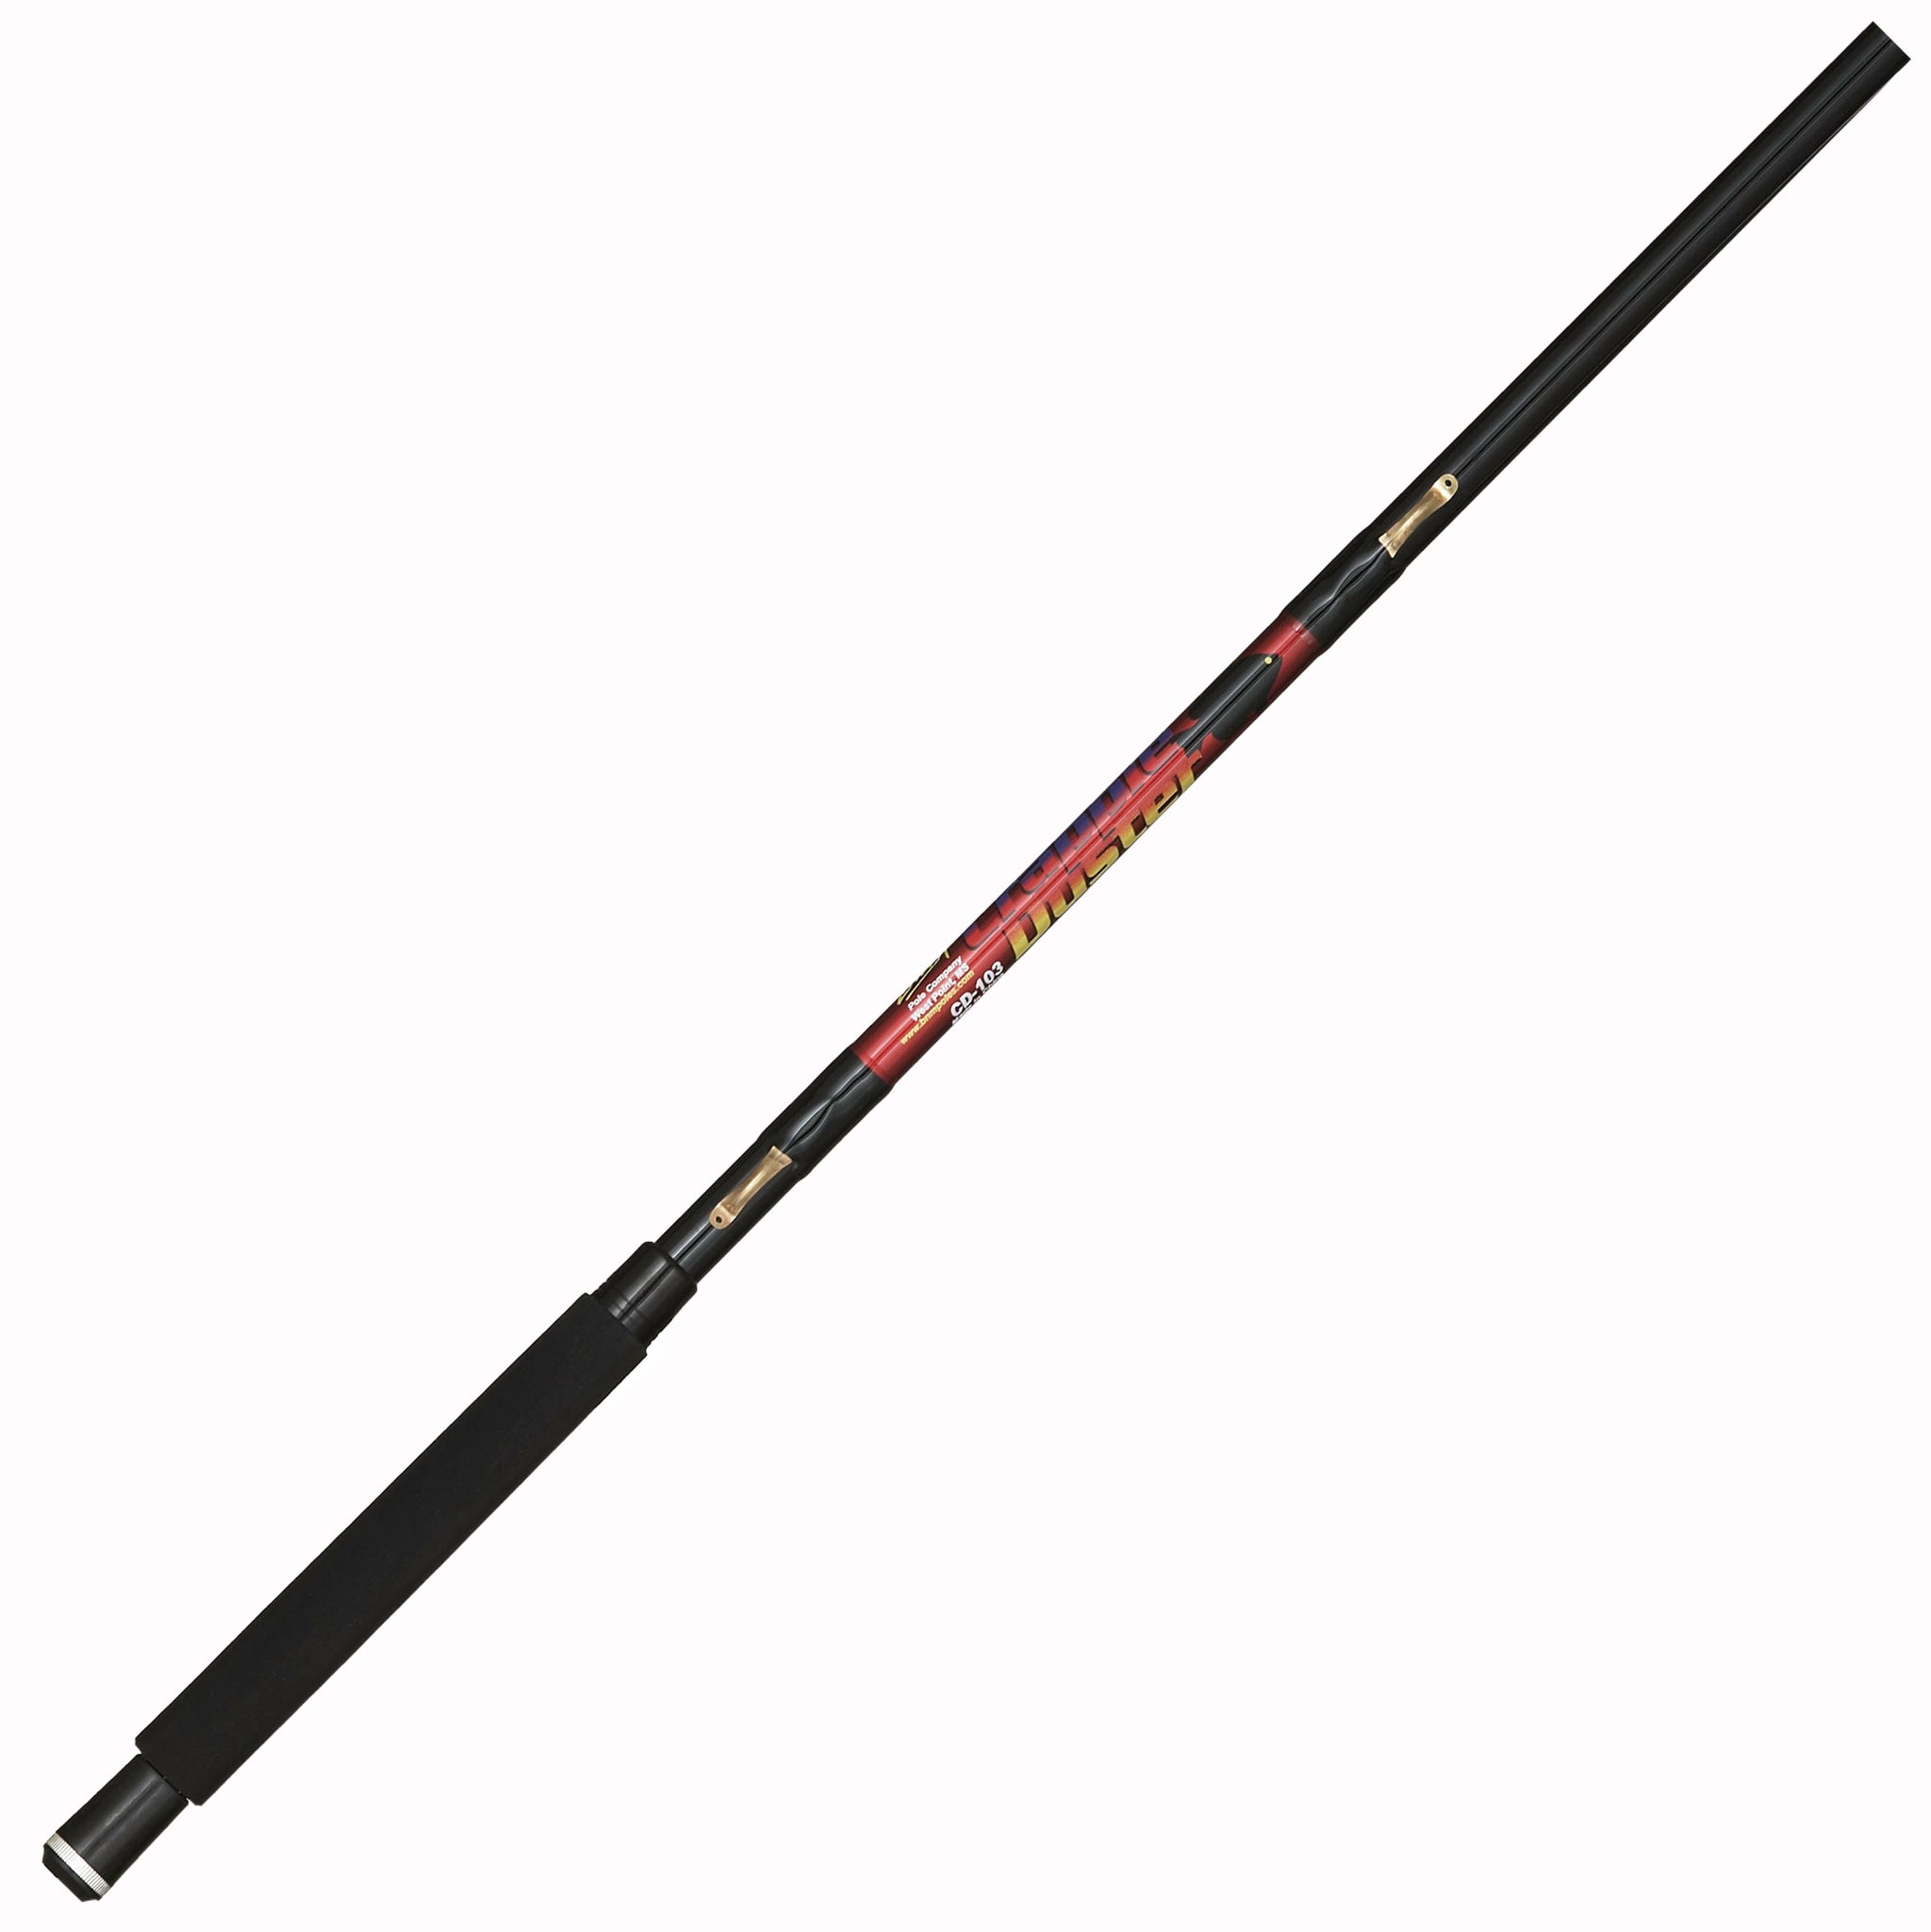 Crappie fishing the new 16- and 18-foot B'n'M Poles Black Diamond